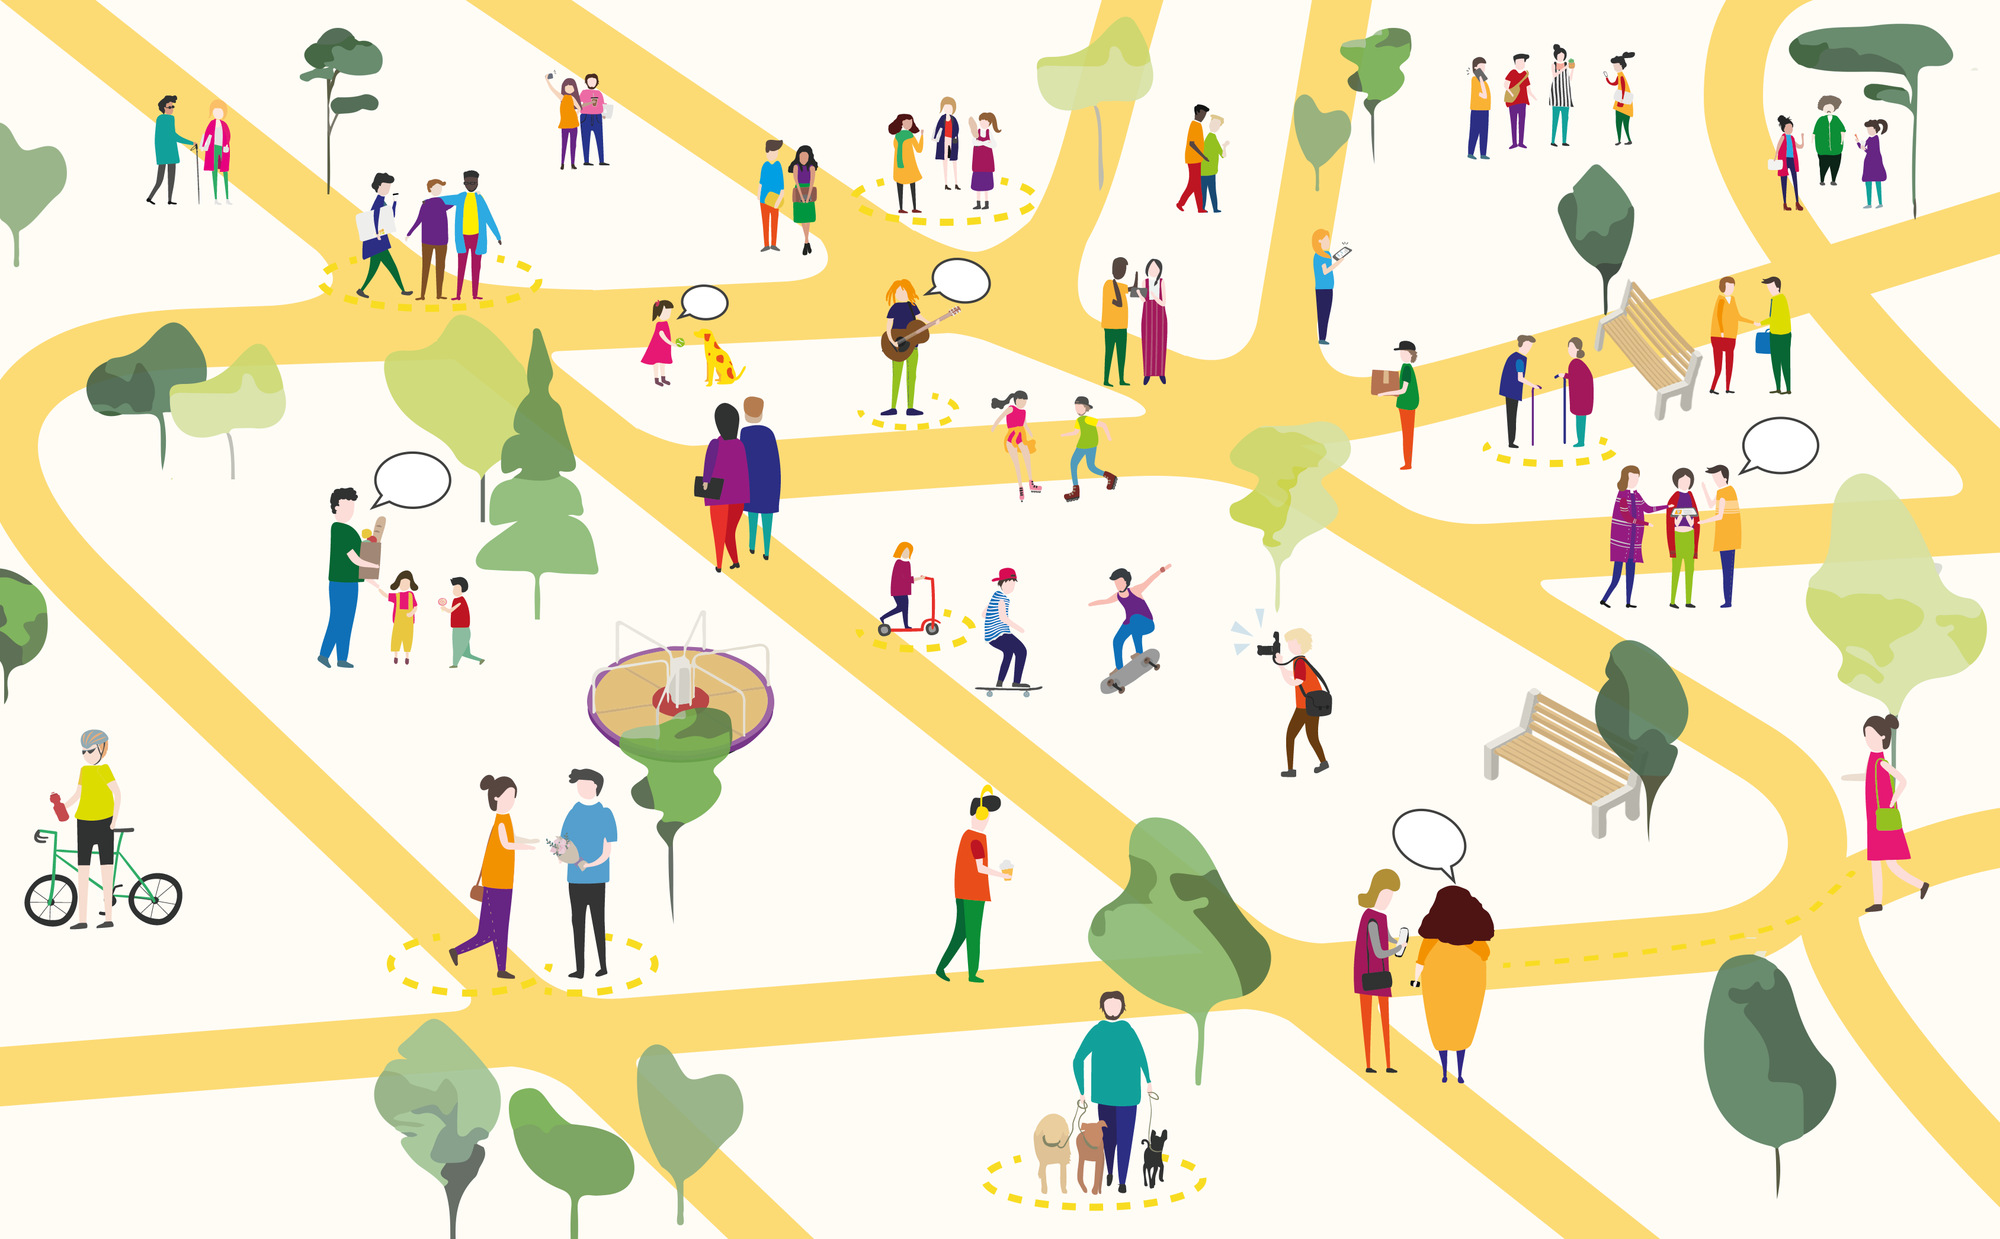 Reinventing Spaces: Placemaking Through Participatory Culture